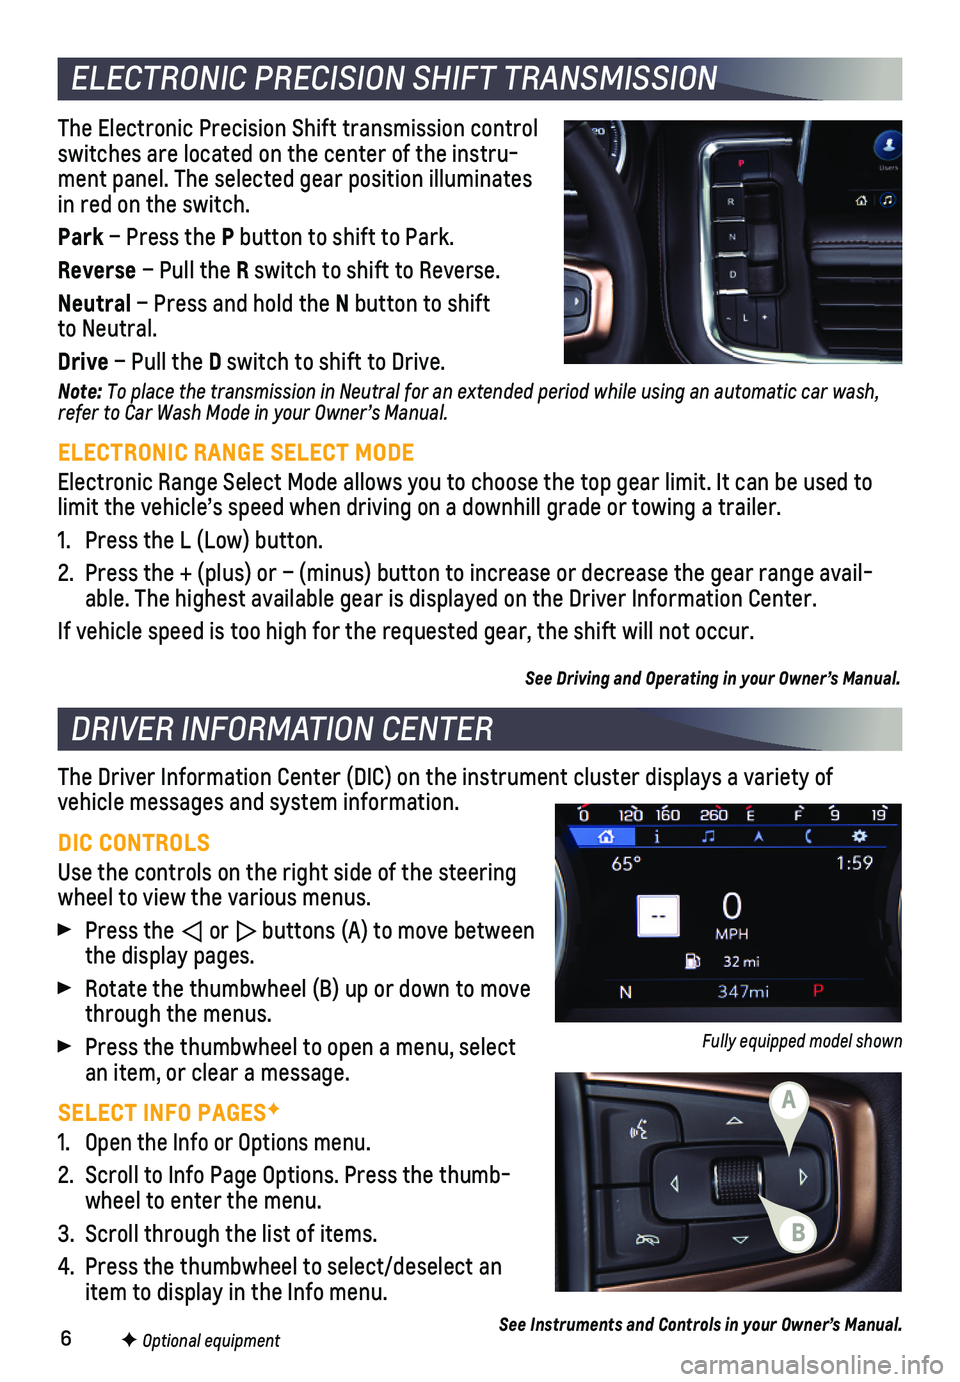 CHEVROLET TAHOE 2021  Get To Know Guide 6F Optional equipment
ELECTRONIC PRECISION SHIFT TRANSMISSION
The Electronic Precision Shift transmission control switches are located on the center of the instru-ment panel. The selected gear positio